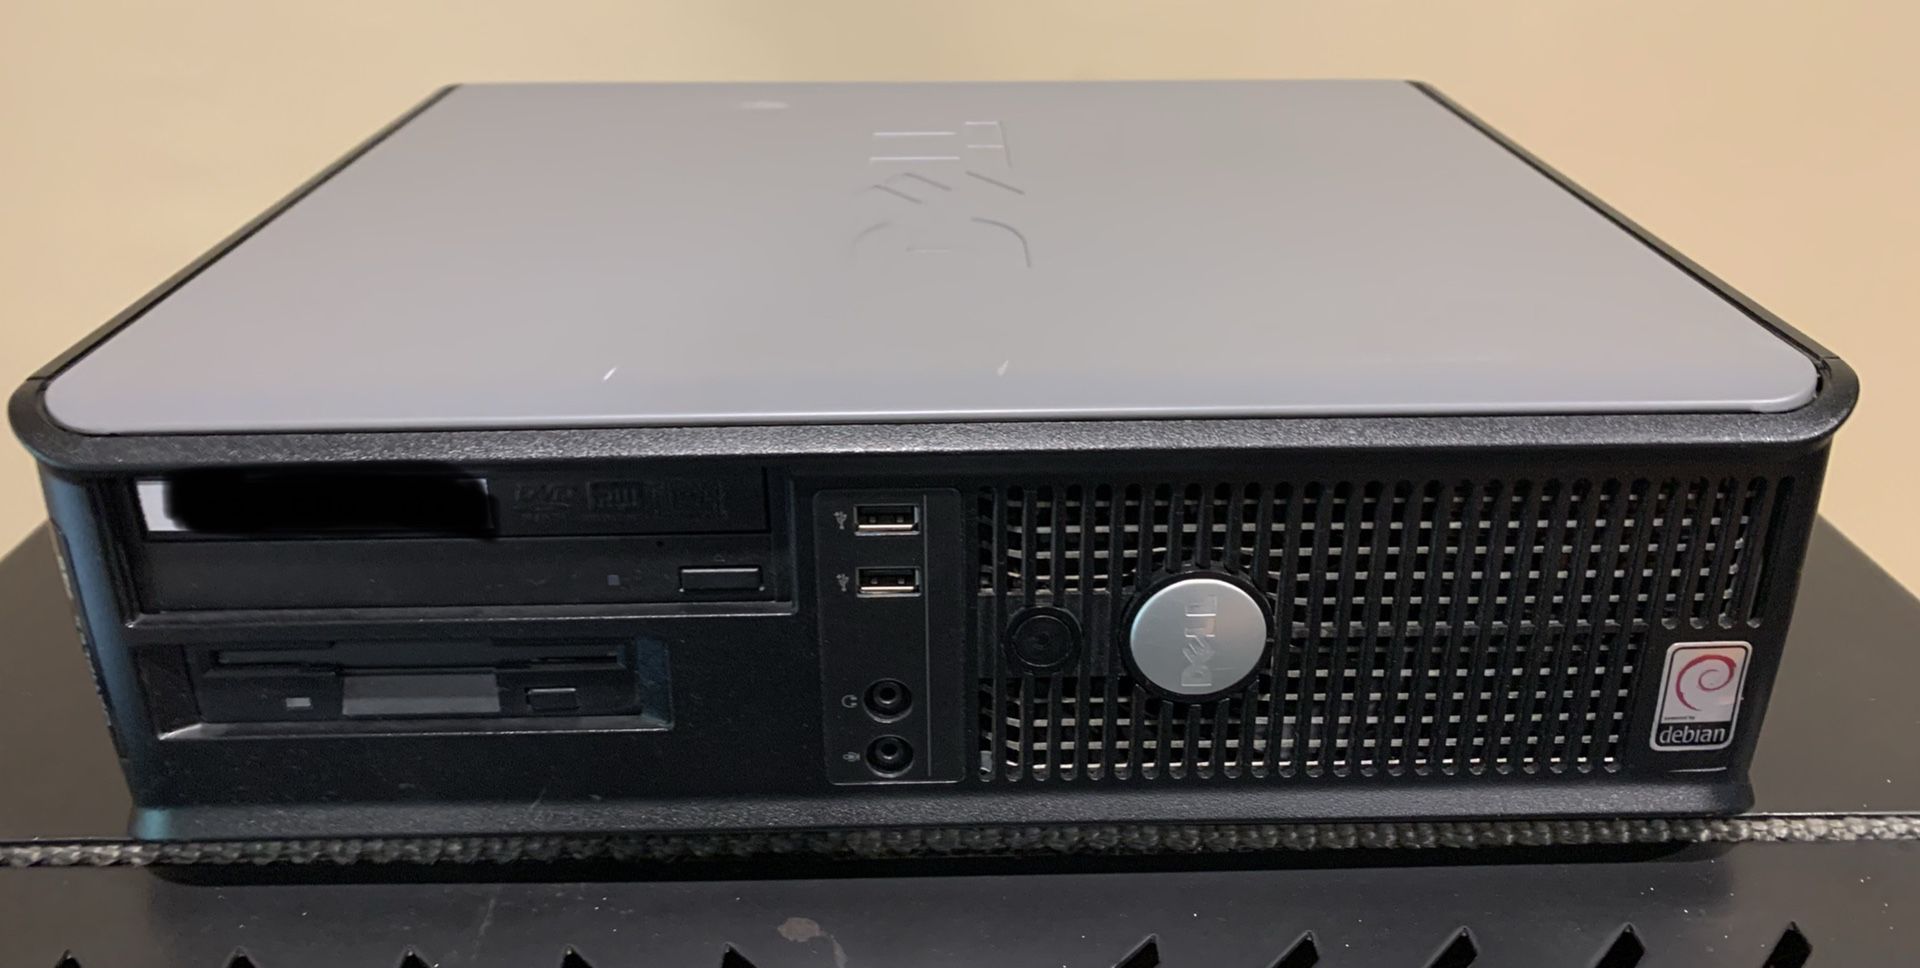 Dell Optiplex 745 Used - MX Linux installed